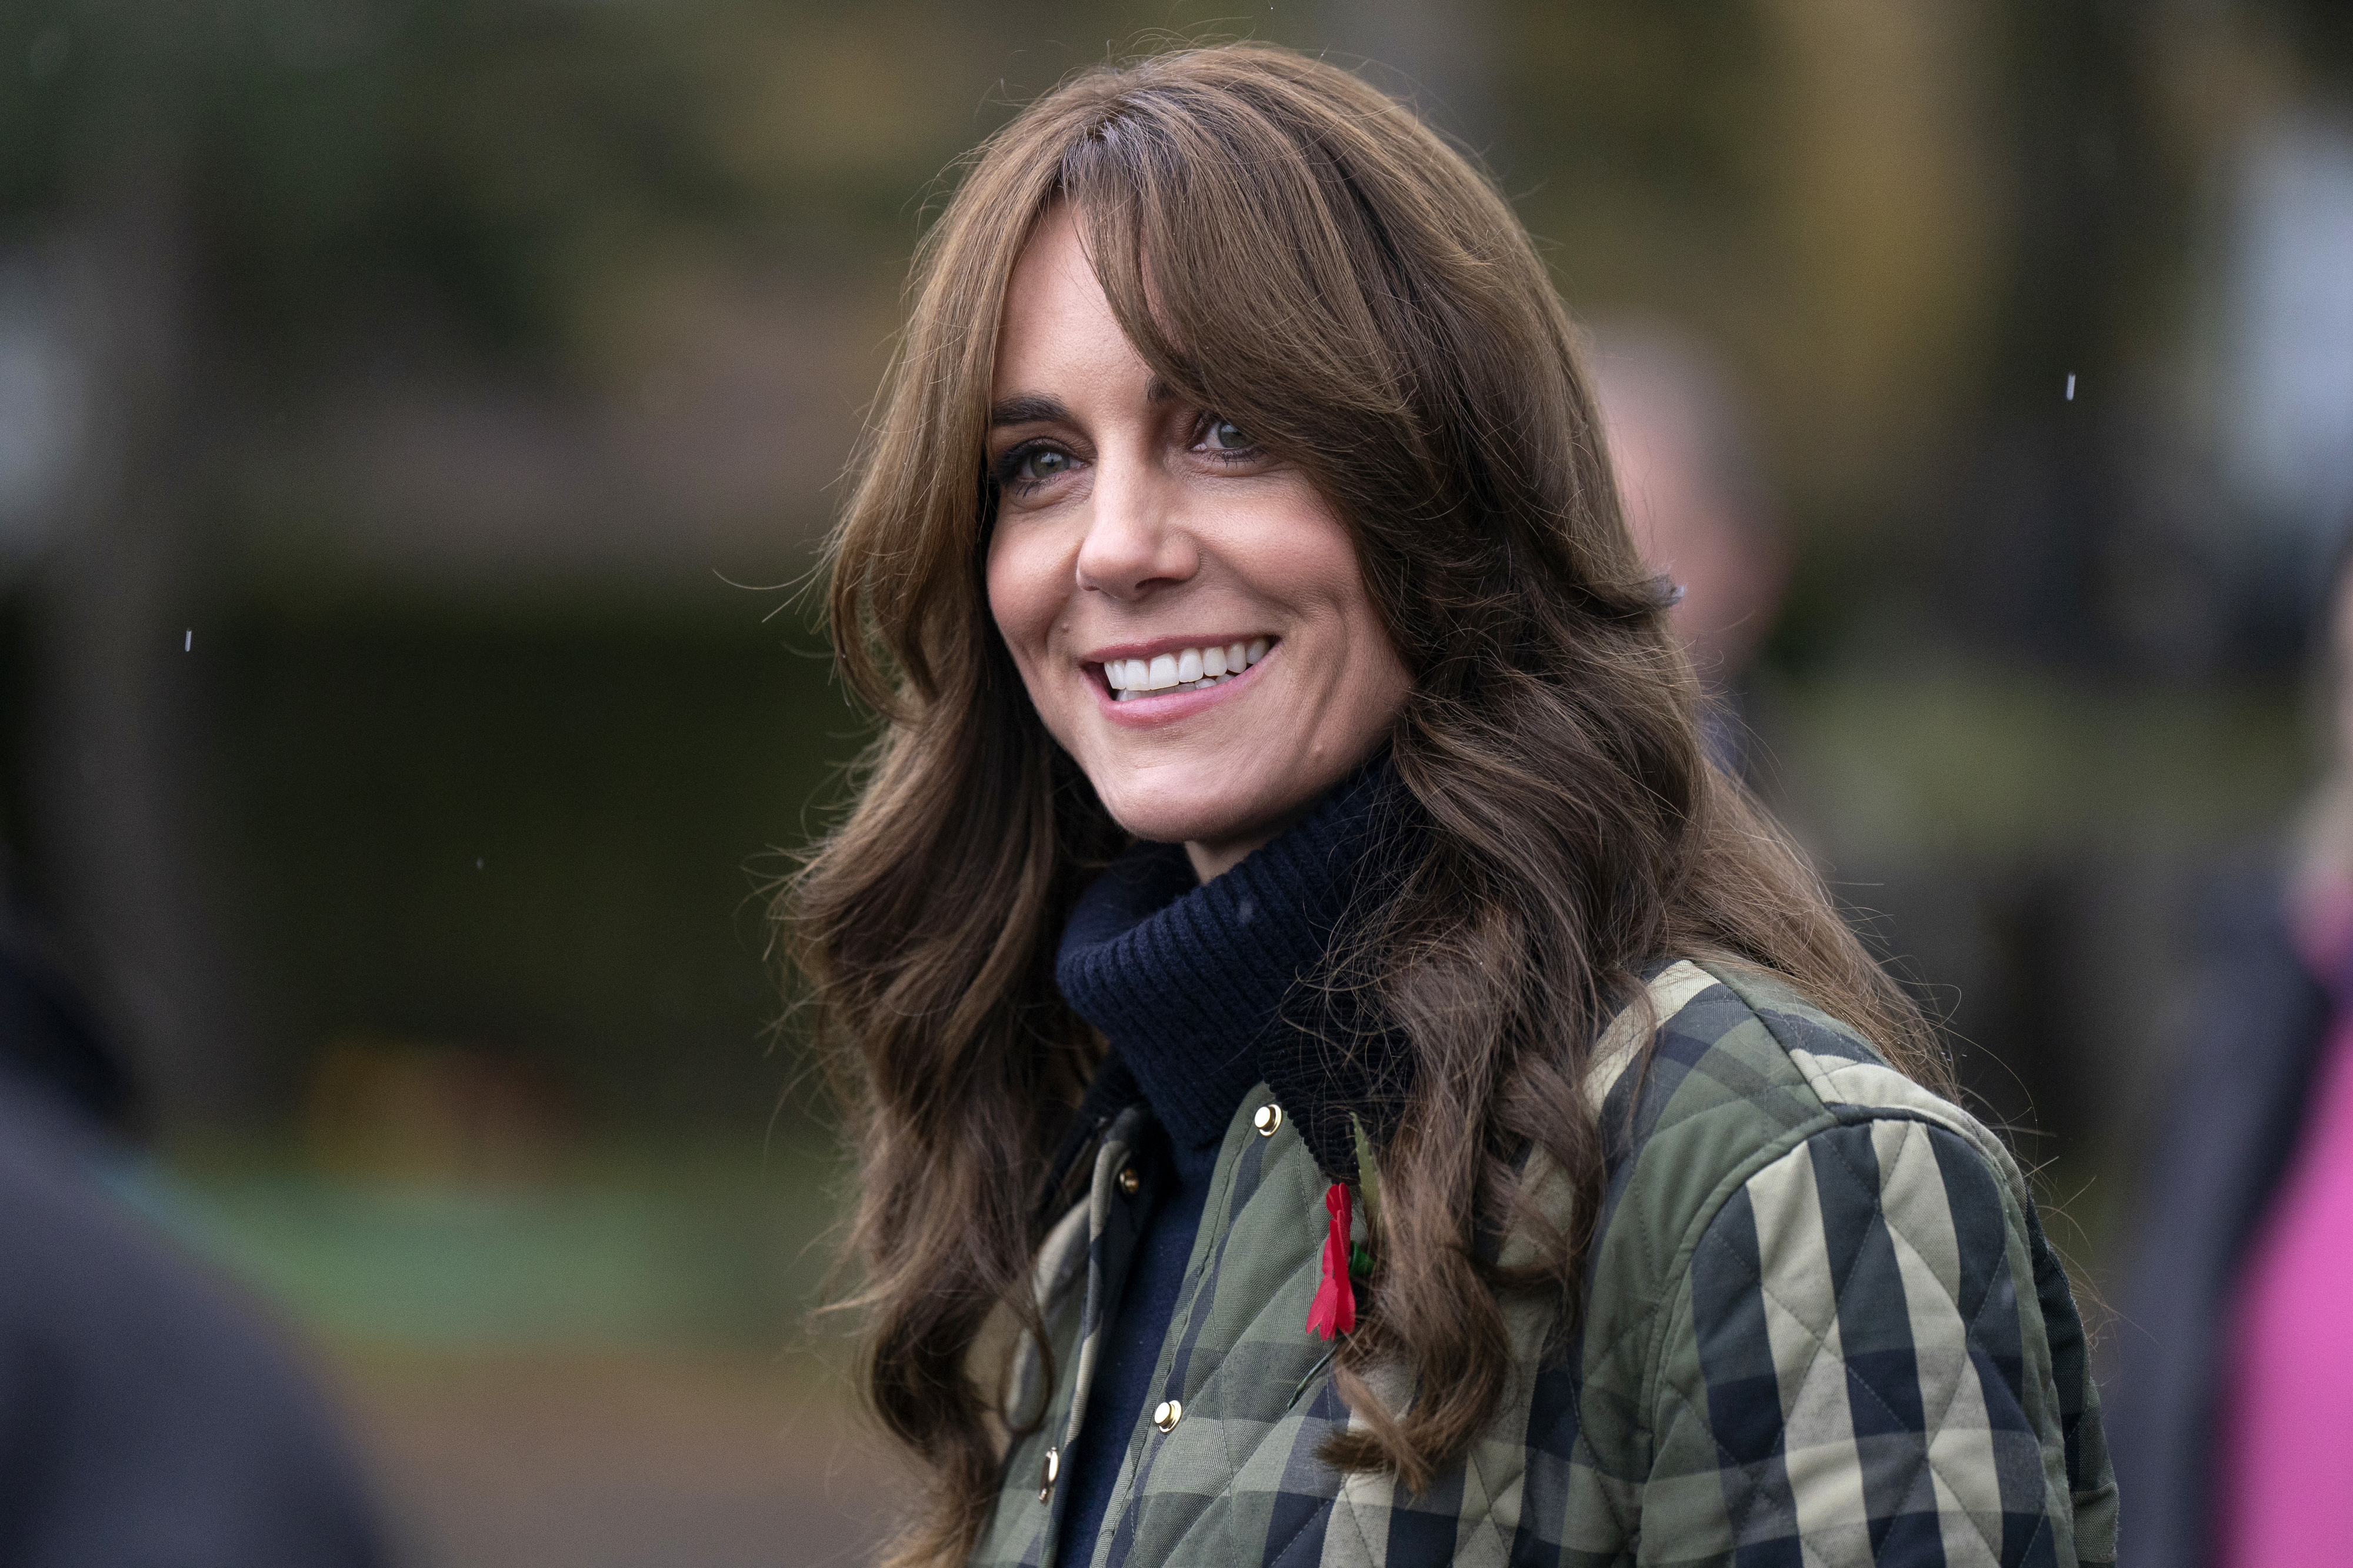 Kate with long hair in a patterned jacket, smiling outdoors